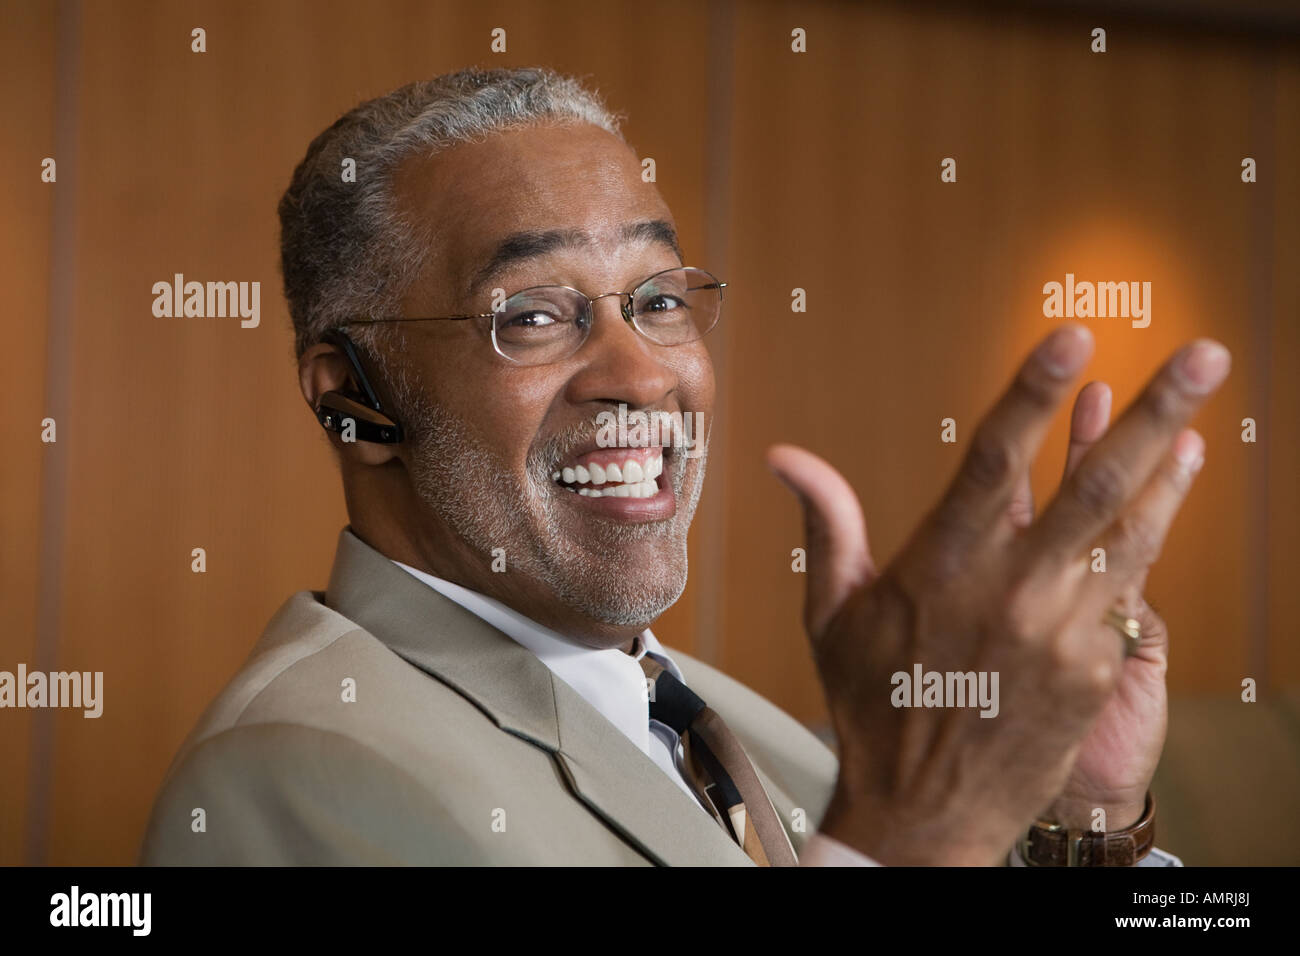 Senior African businessman wearing hands-free device Stock Photo